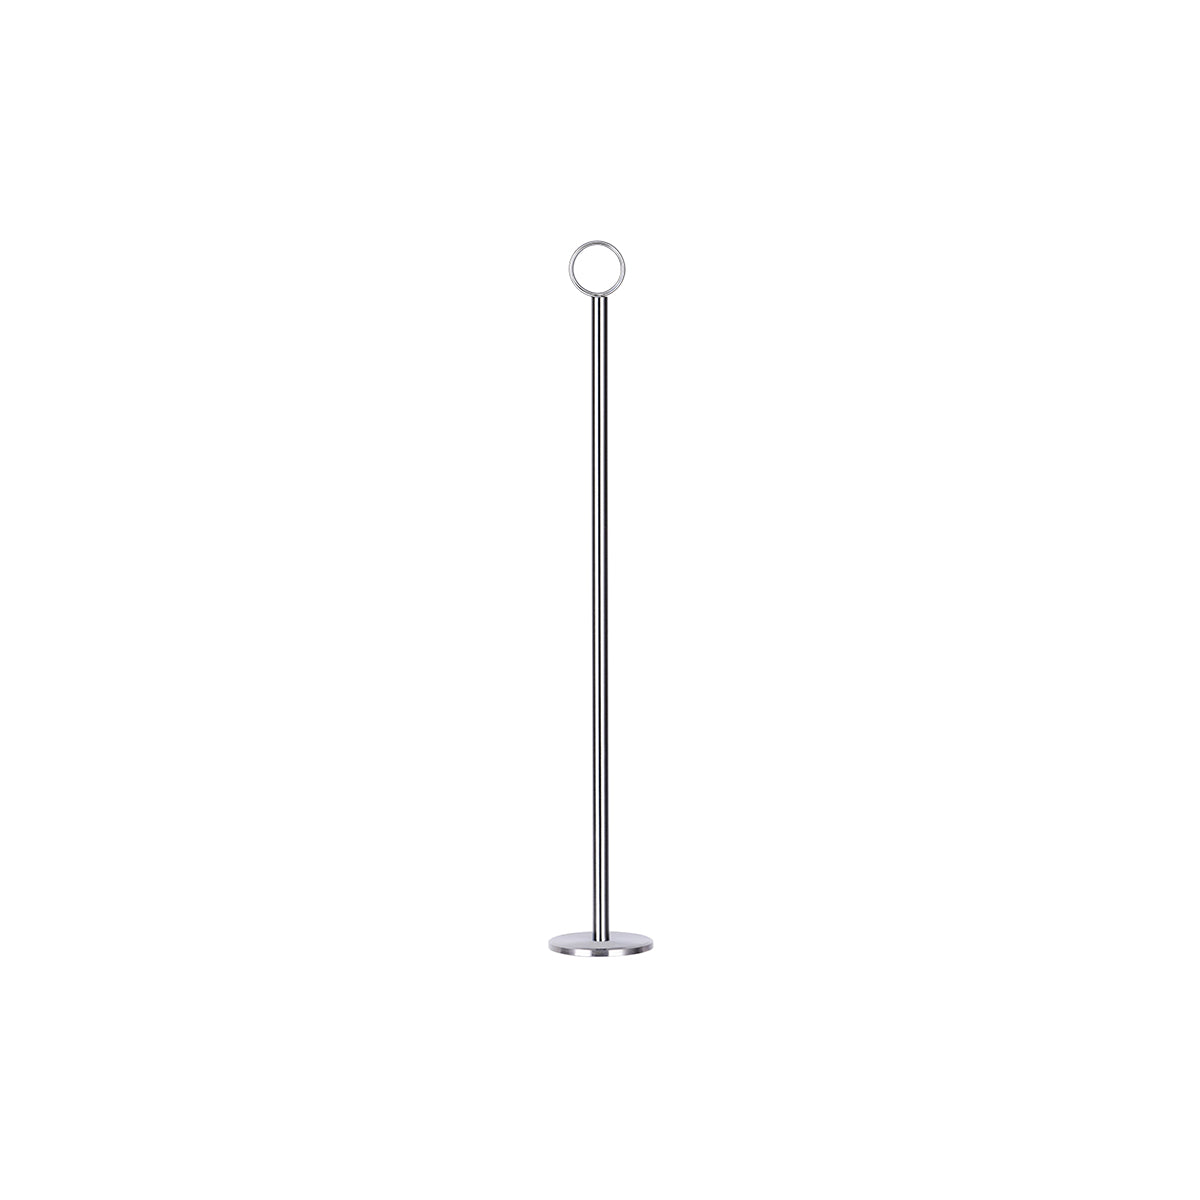 08138 Chef Inox Table Number Stand 370mm Tomkin Australia Hospitality Supplies